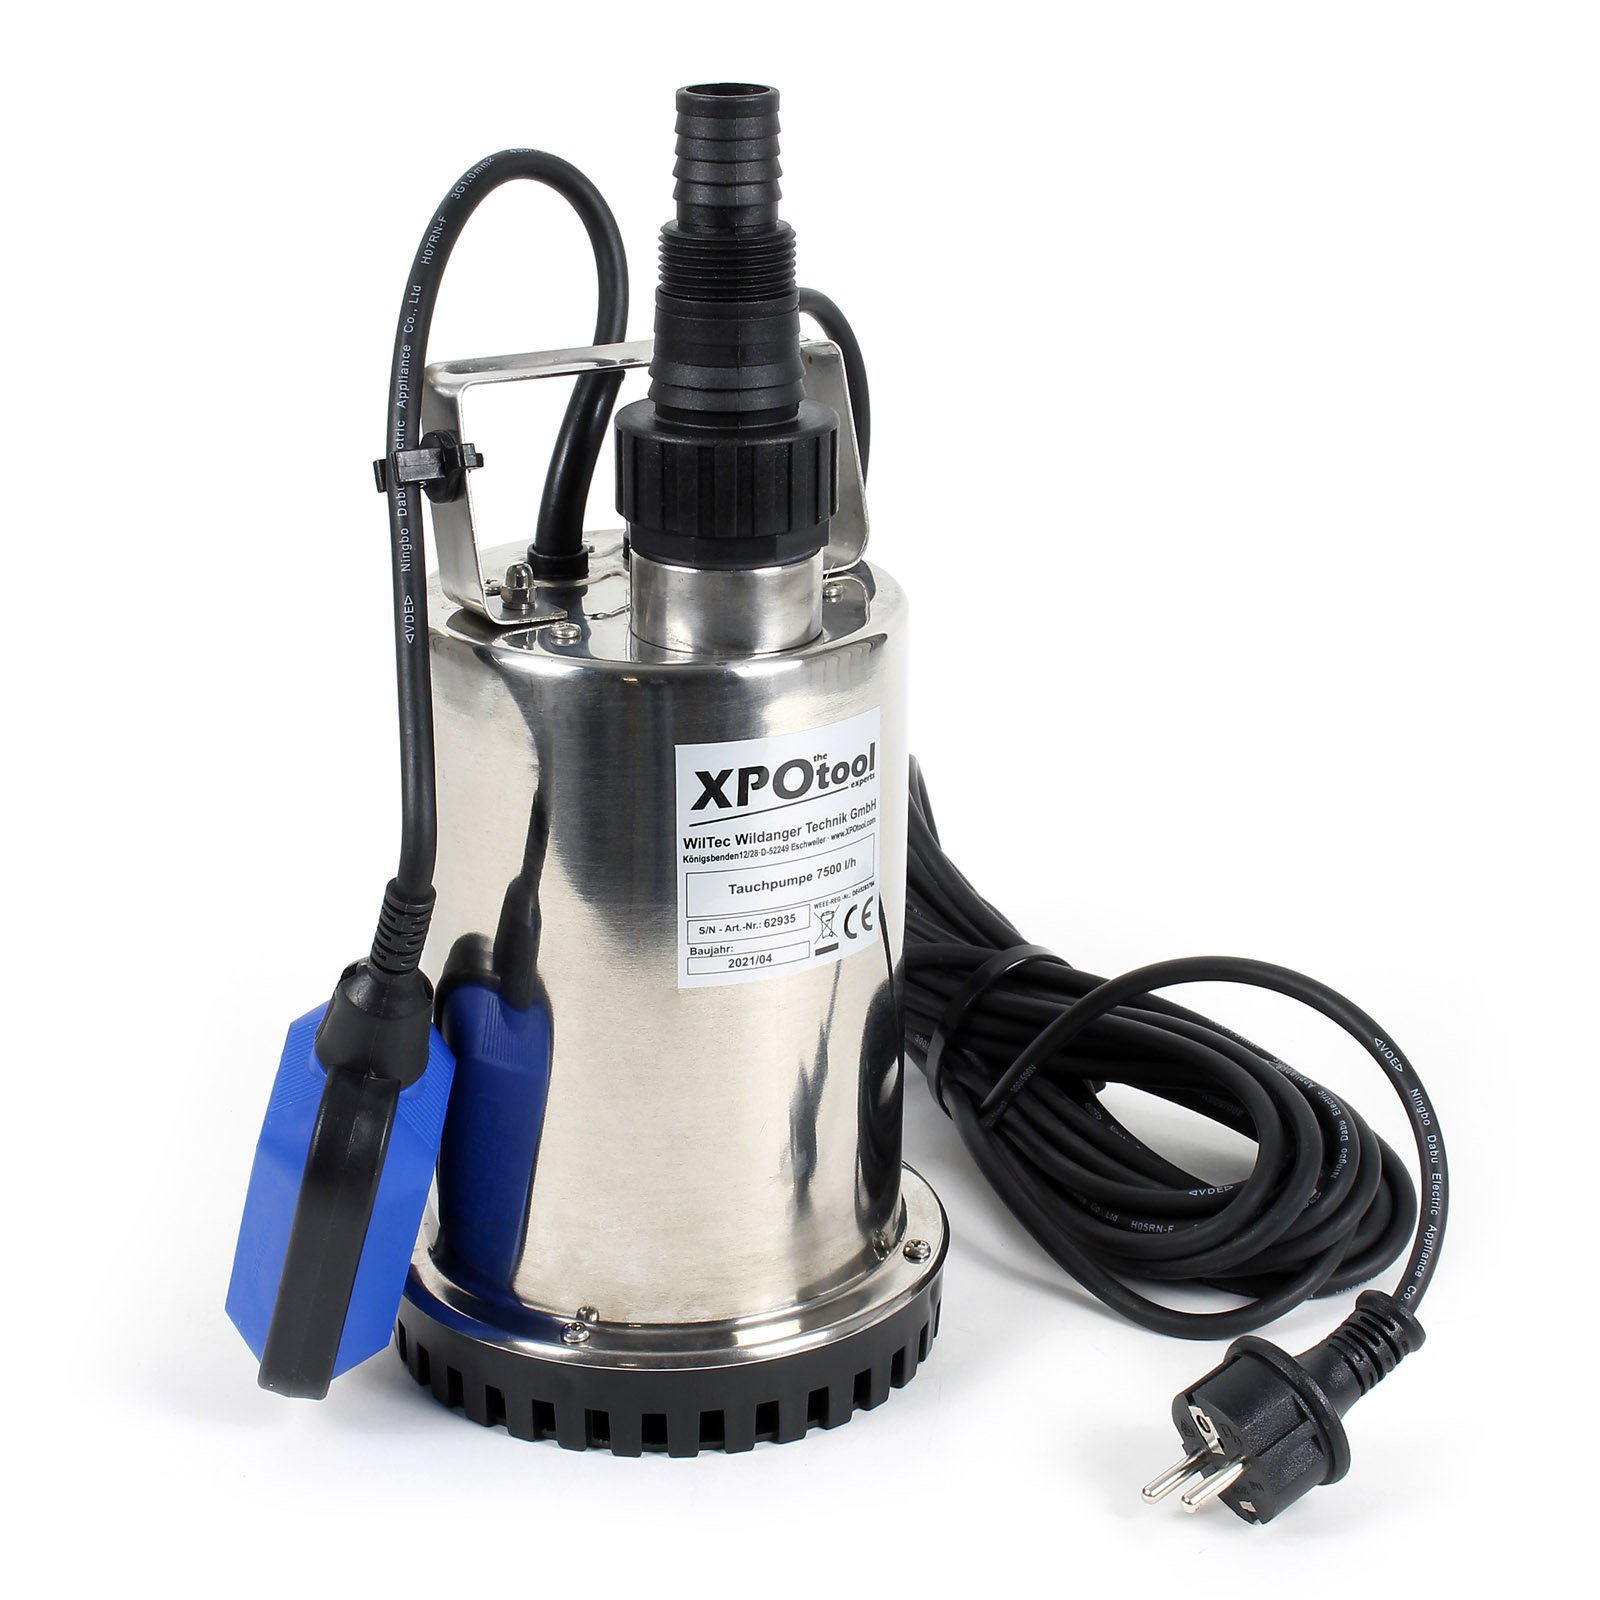 XPOtool Submersible Pump up to 7500l/h 400W Dirty Water Pump with 10m Cable